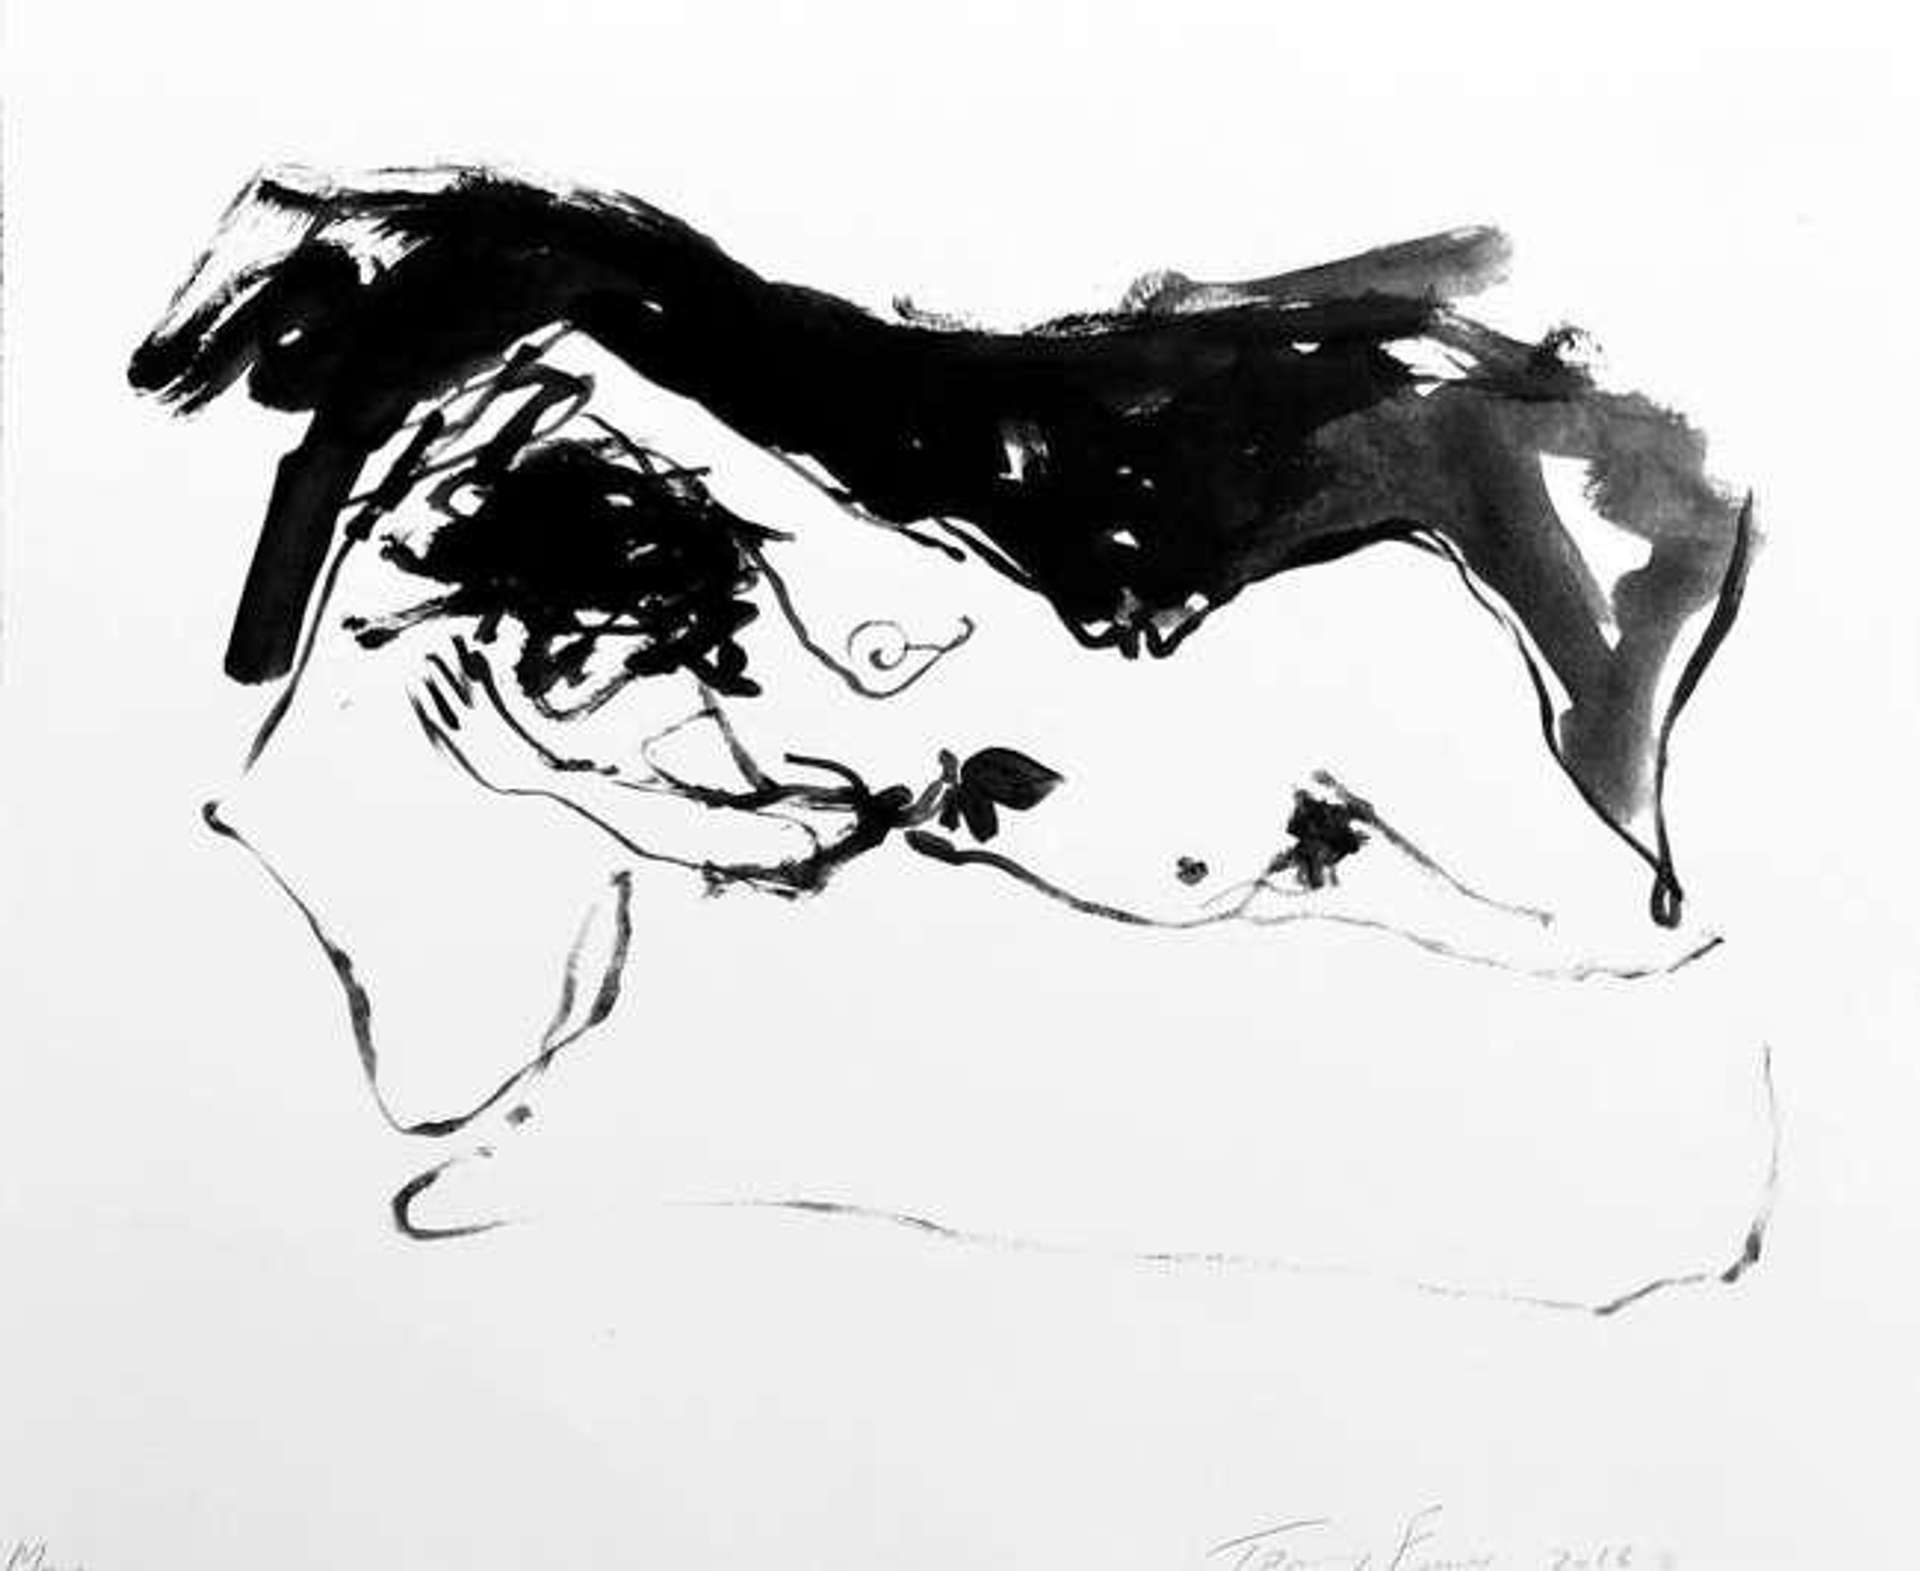 Tracey Emin: Move - Signed Print